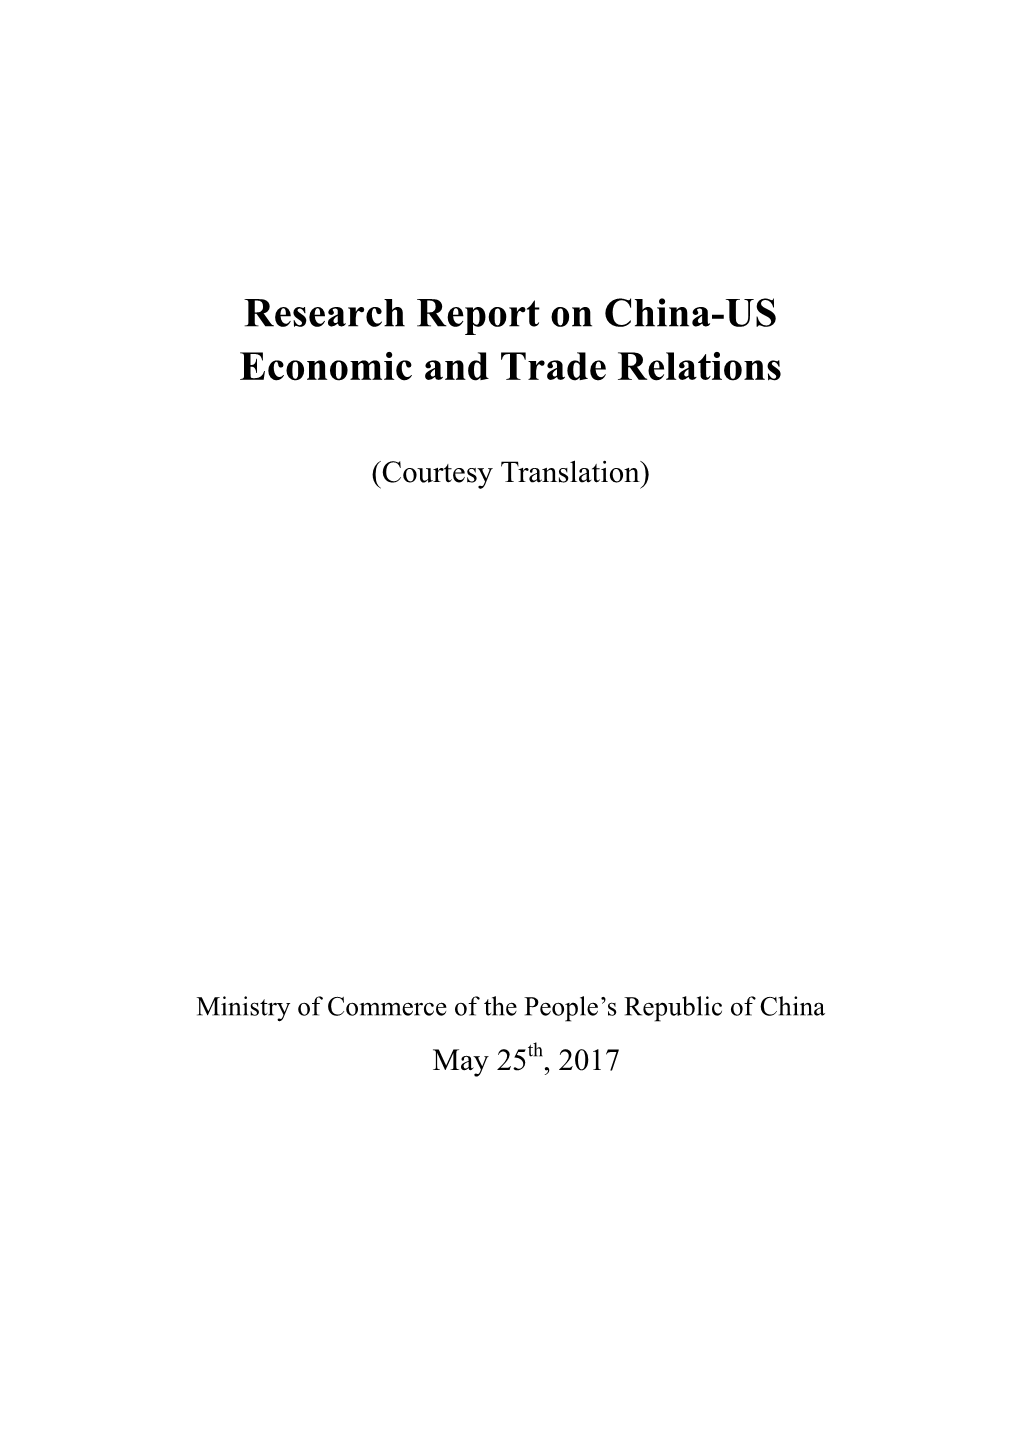 Research Report on China-US Economic and Trade Relations